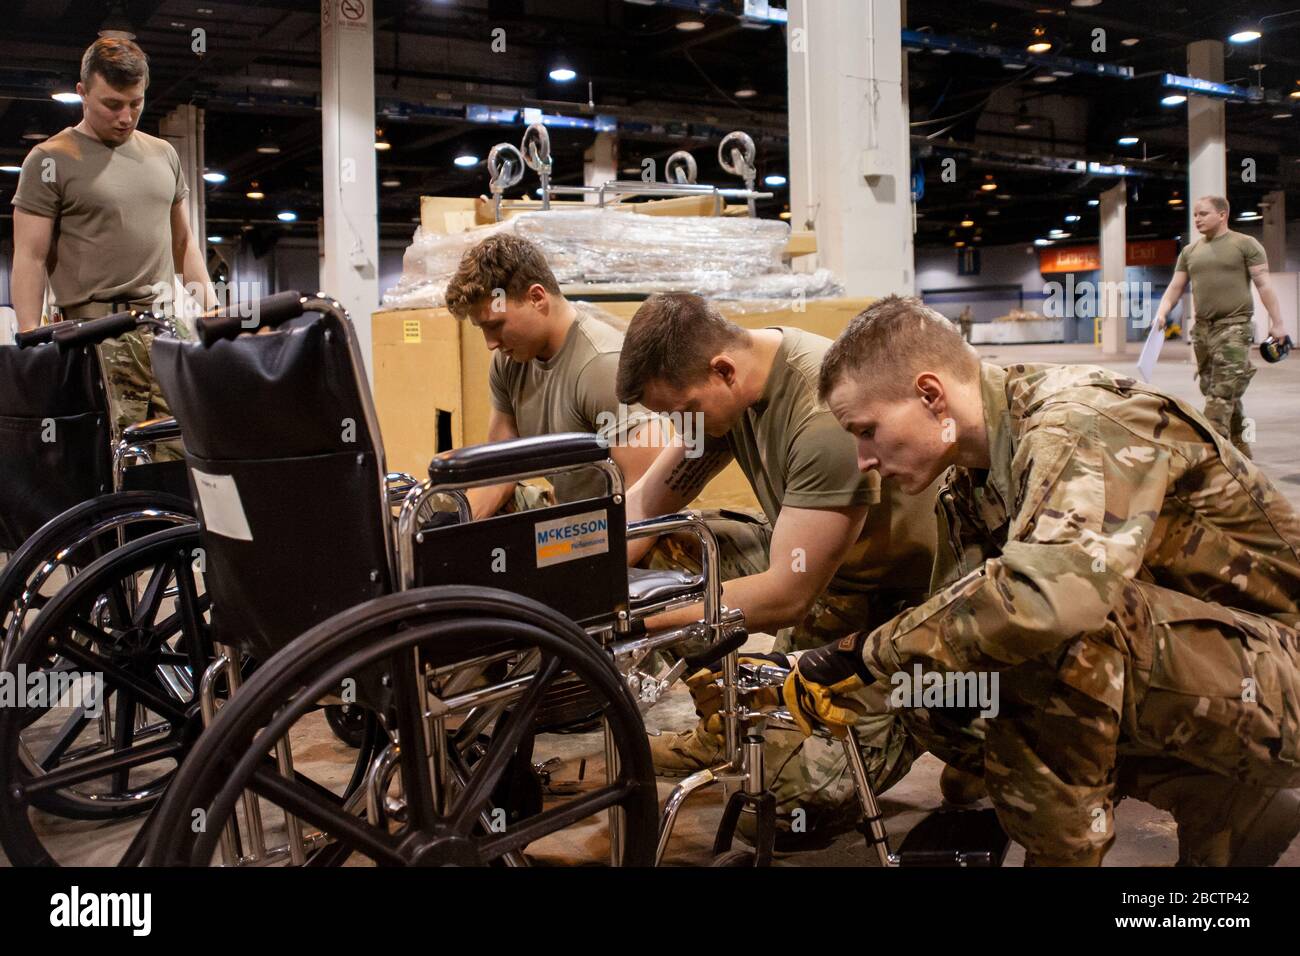 Members of the Illinois Air National Guard assemble medical equipment at the McCormick Place Convention Center in response to the COVID-19 pandemic in Chicago, Ill., March 30, 2020. Approximately 30 members of the Illinois Air National Guard were activated to support the US Army Corps of Engineers and the Federal Emergency Management Agency (FEMA) to temporarily convert part of the McCormick Place Convention Center into an Alternate Care Facility (ACF) for COVID-19 patients with mild symptoms who do not require intensive care in the Chicago area. (U.S. Air Force Photo by Senior Airman Jay Grab Stock Photo